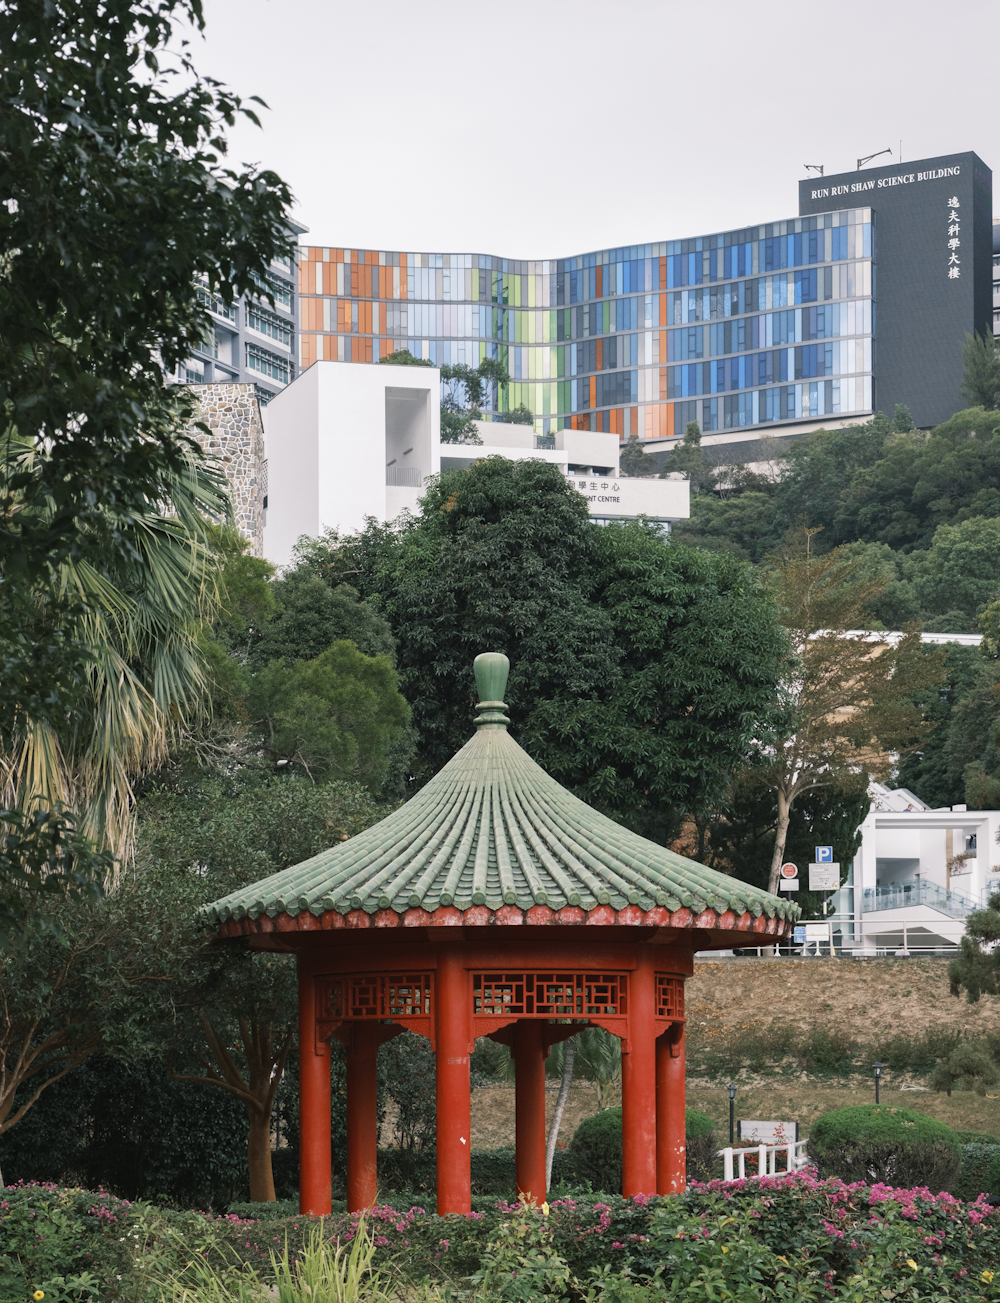 a gazebo in a park with buildings in the background